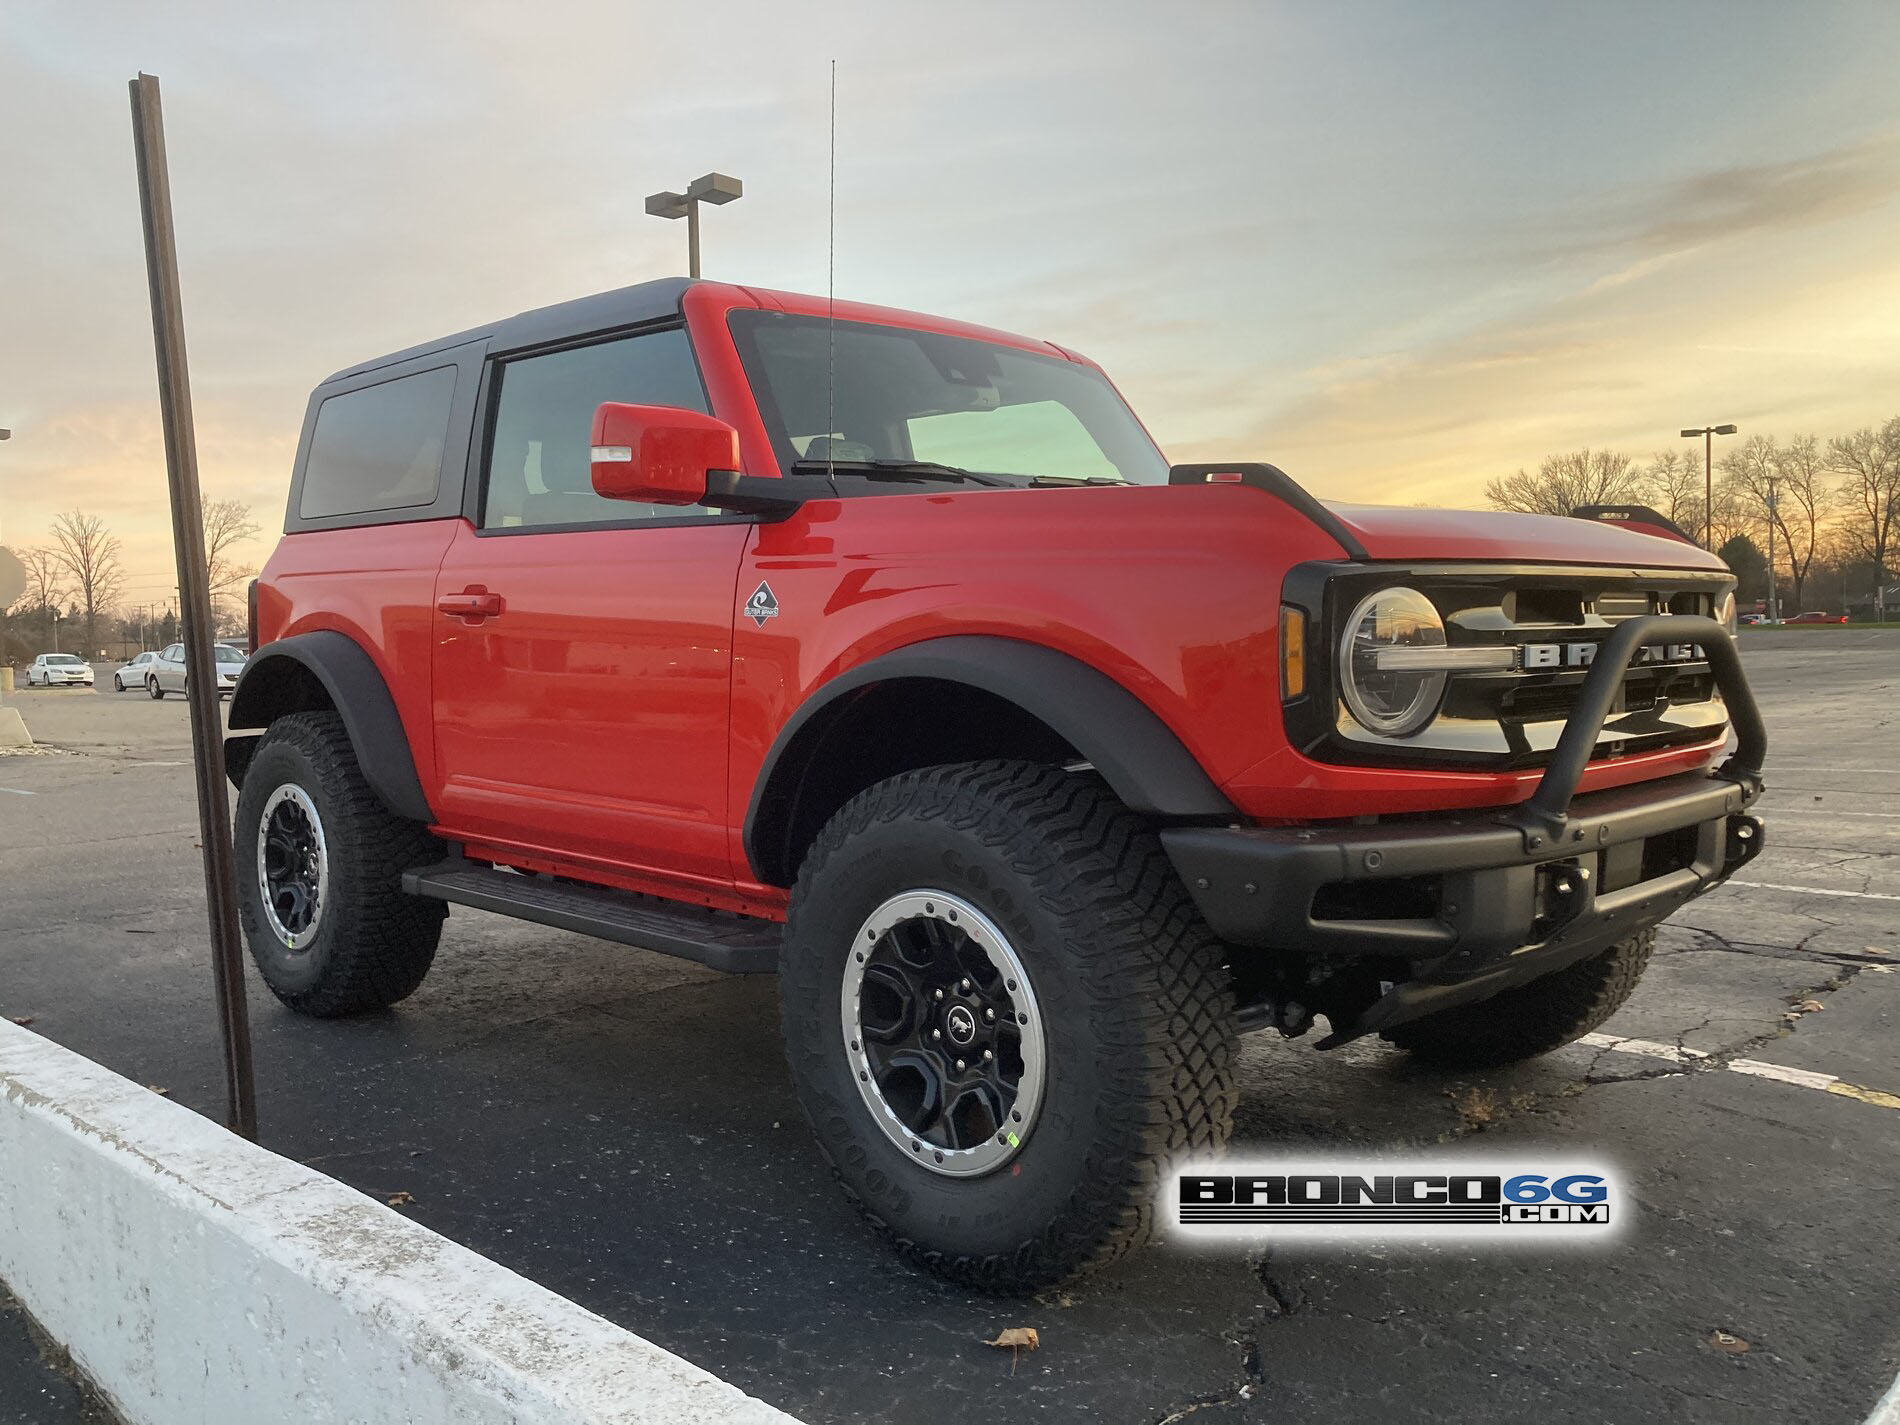 Ford Bronco 2-Door Bronco Glamour Shots? Race Red Outerbanks Sasquatch _ Interior and exterior pics 5